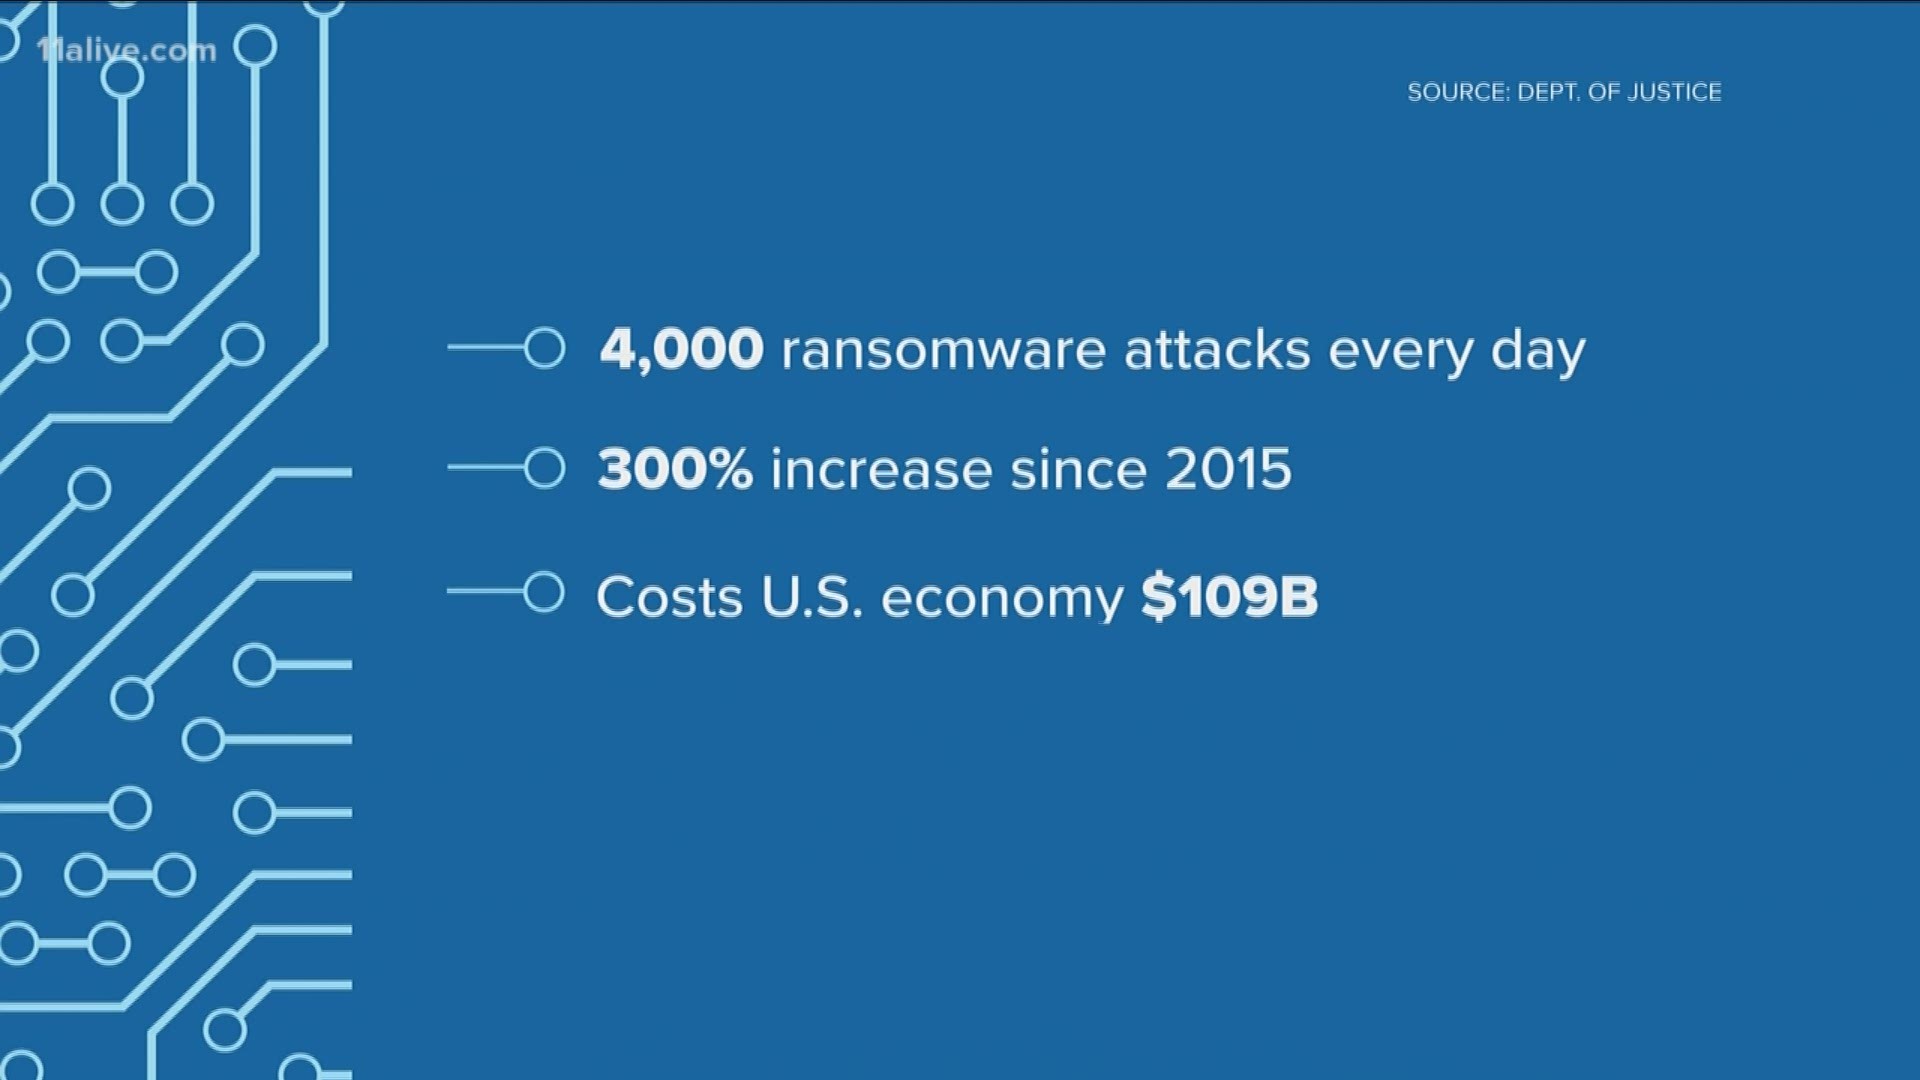 The U.S Economy pays more than a hundred billion dollars for Ransomware attacks.